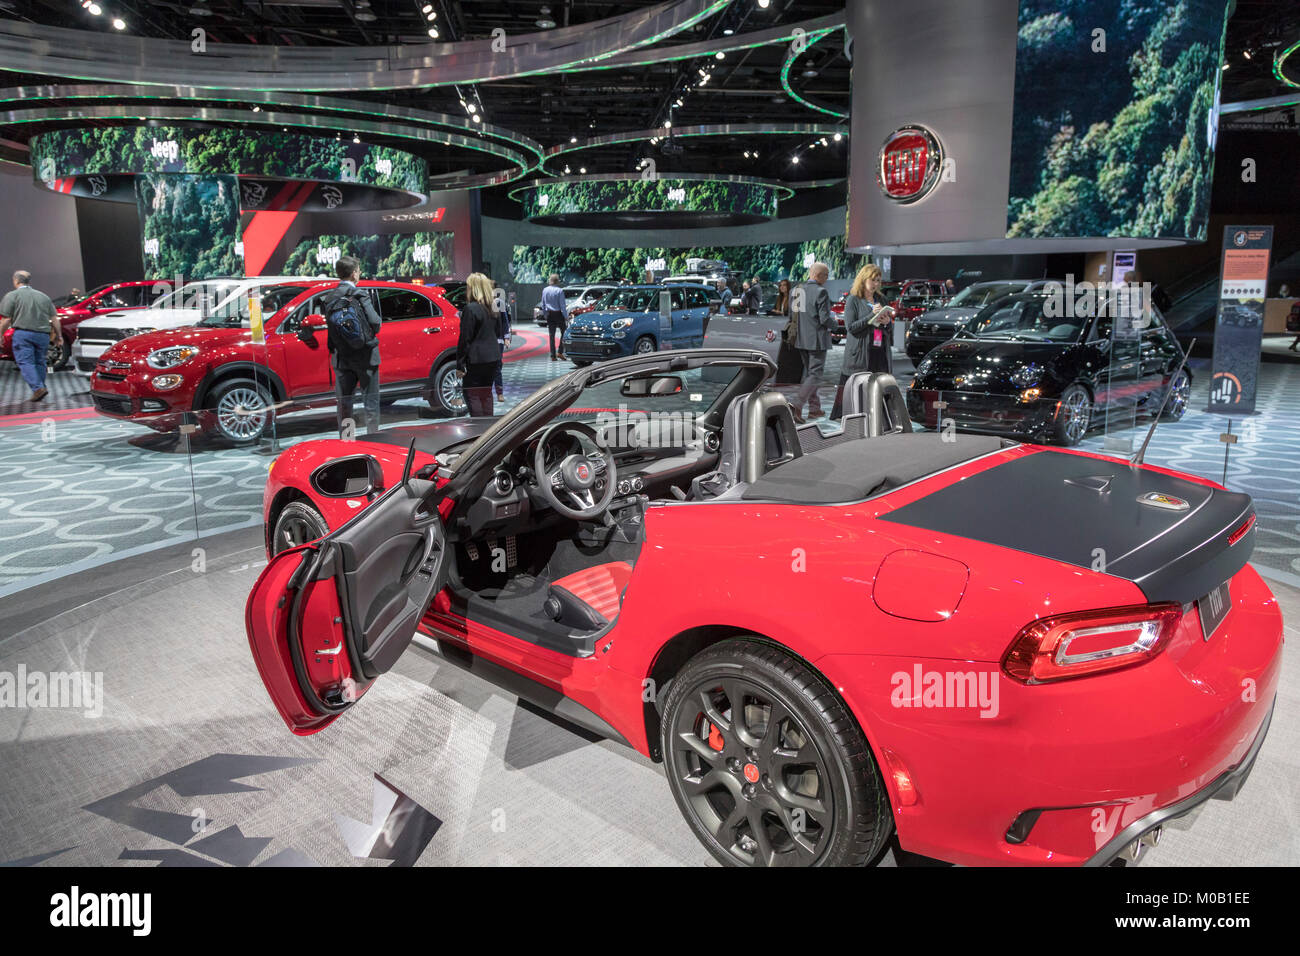 Detroit, Michigan - The Fiat 124 Spider in the Fiat Chrysler display at the North American International Auto Show. Stock Photo